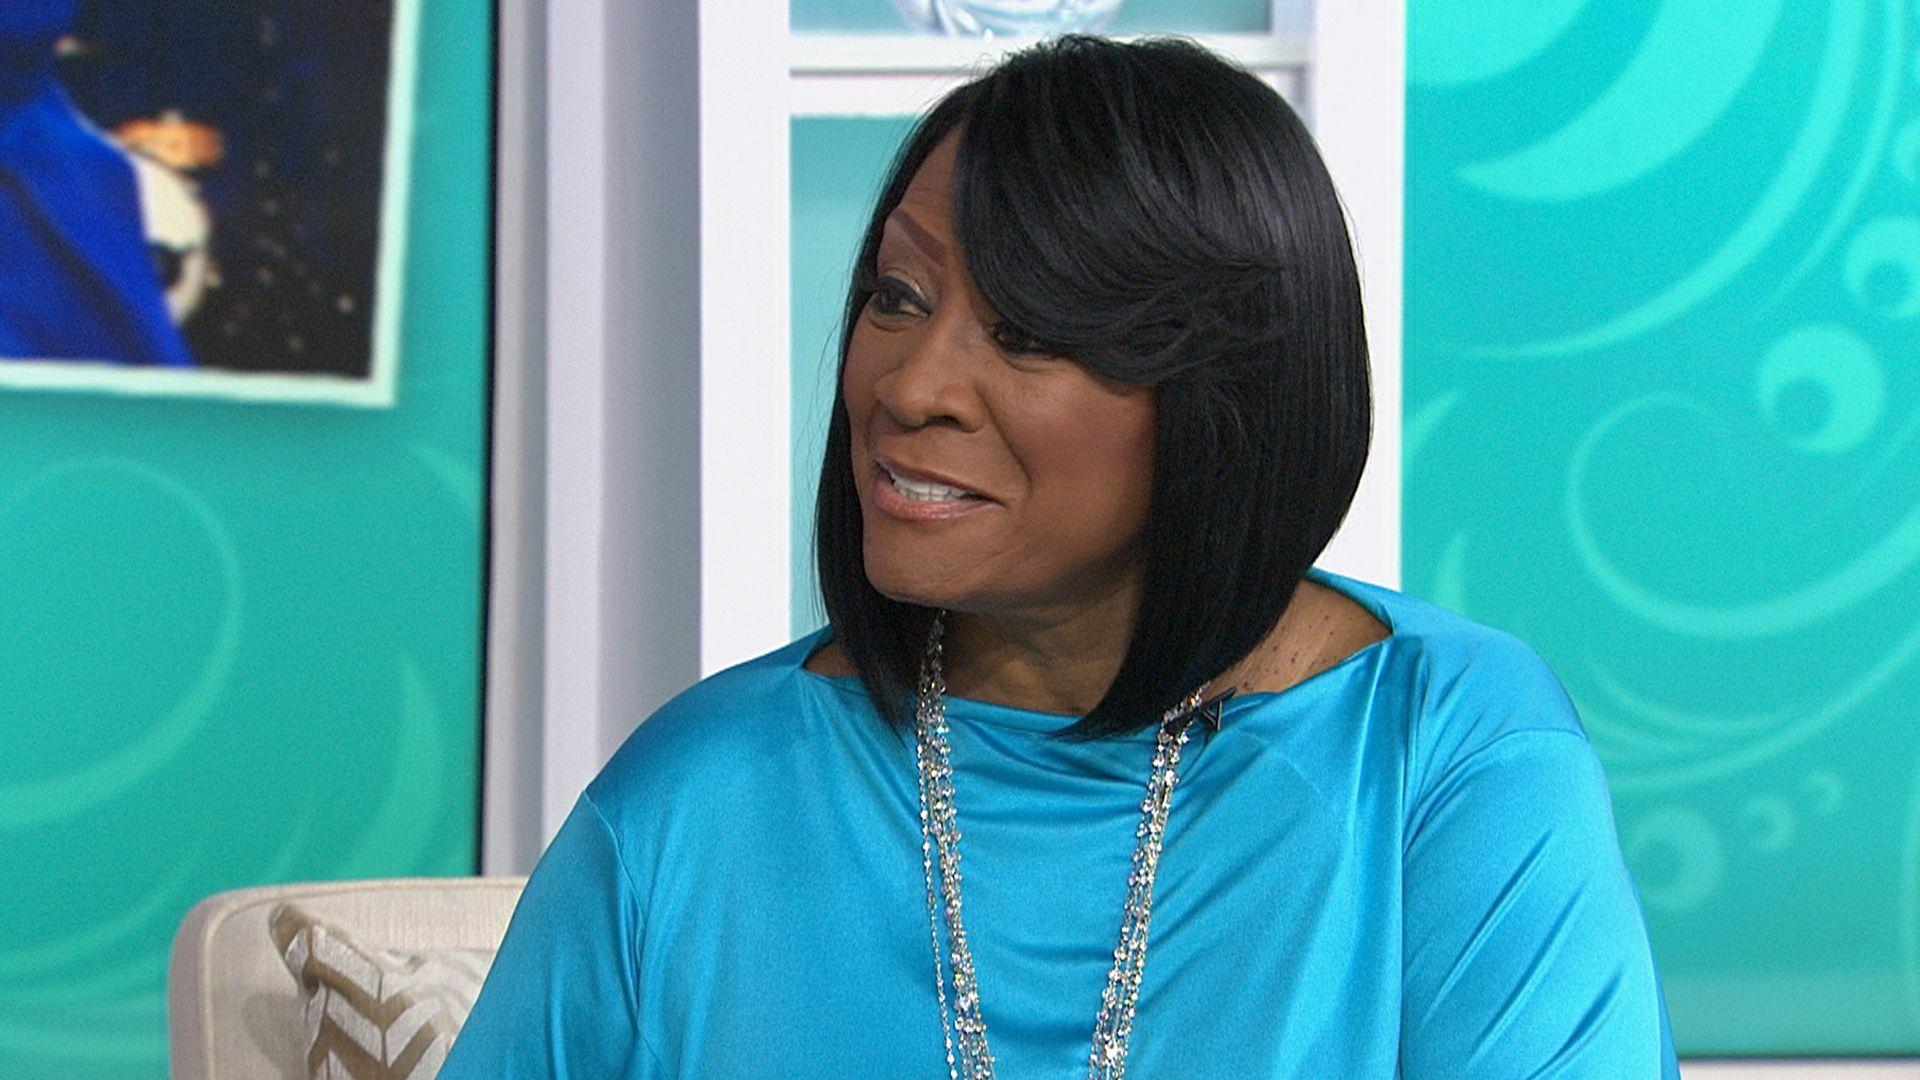 Patti LaBelle wears turquoise to raise awareness of lung cancer